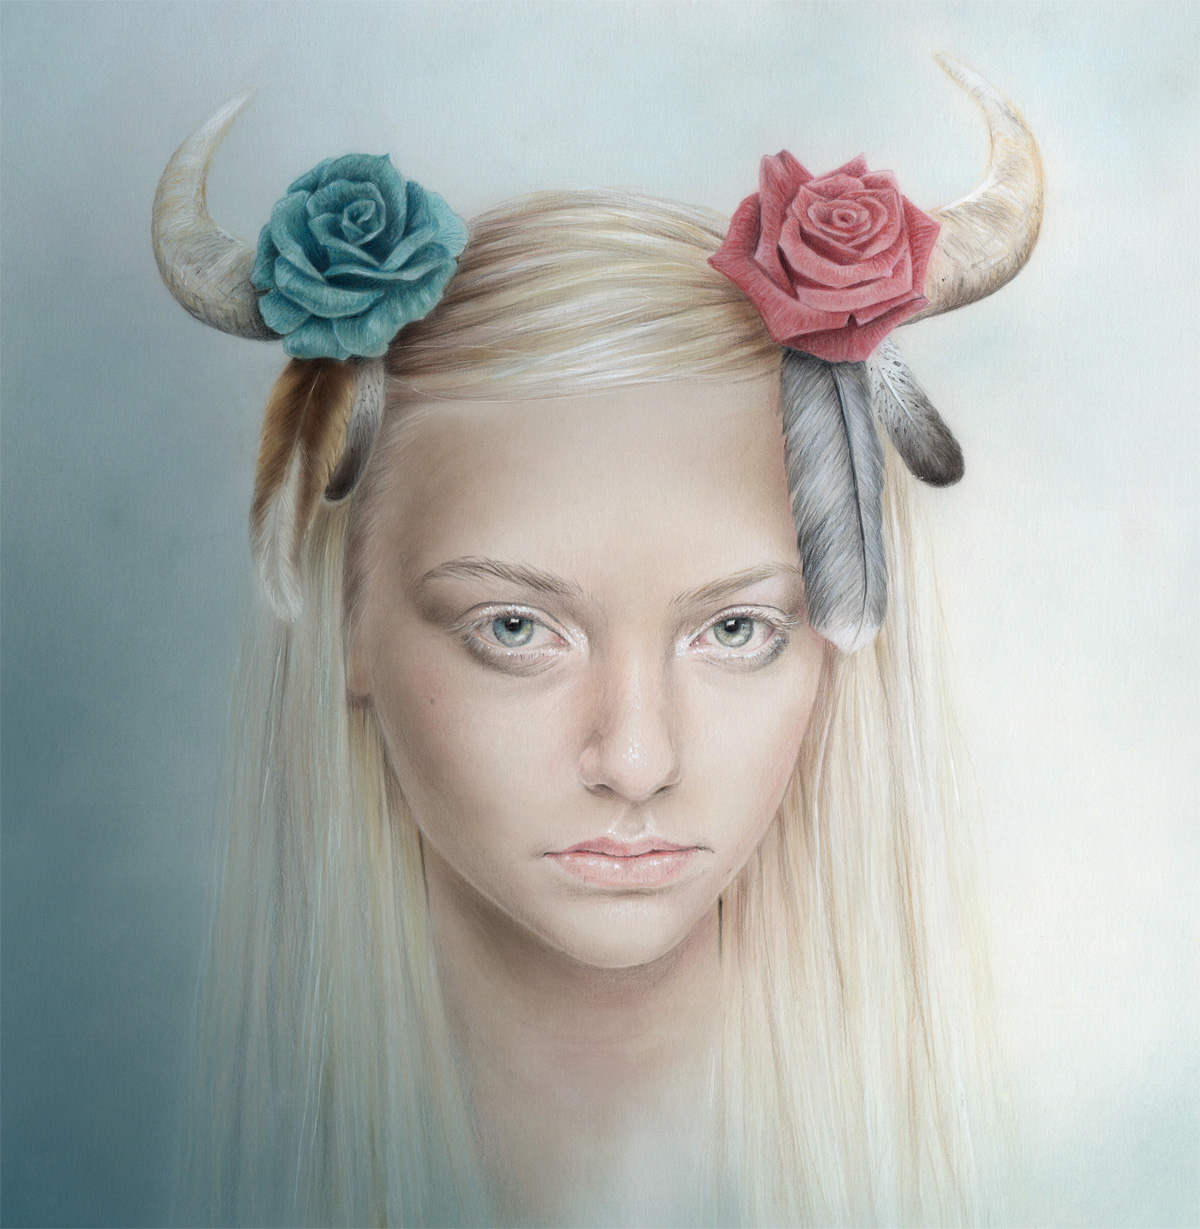   Arya &nbsp;. Pencil , pastel and watercolour . 21 x 21cm .&nbsp;LAX/SFO . Thinkspace Gallery curated show . Hashimoto Contemporary, San Francisco,&nbsp;US 